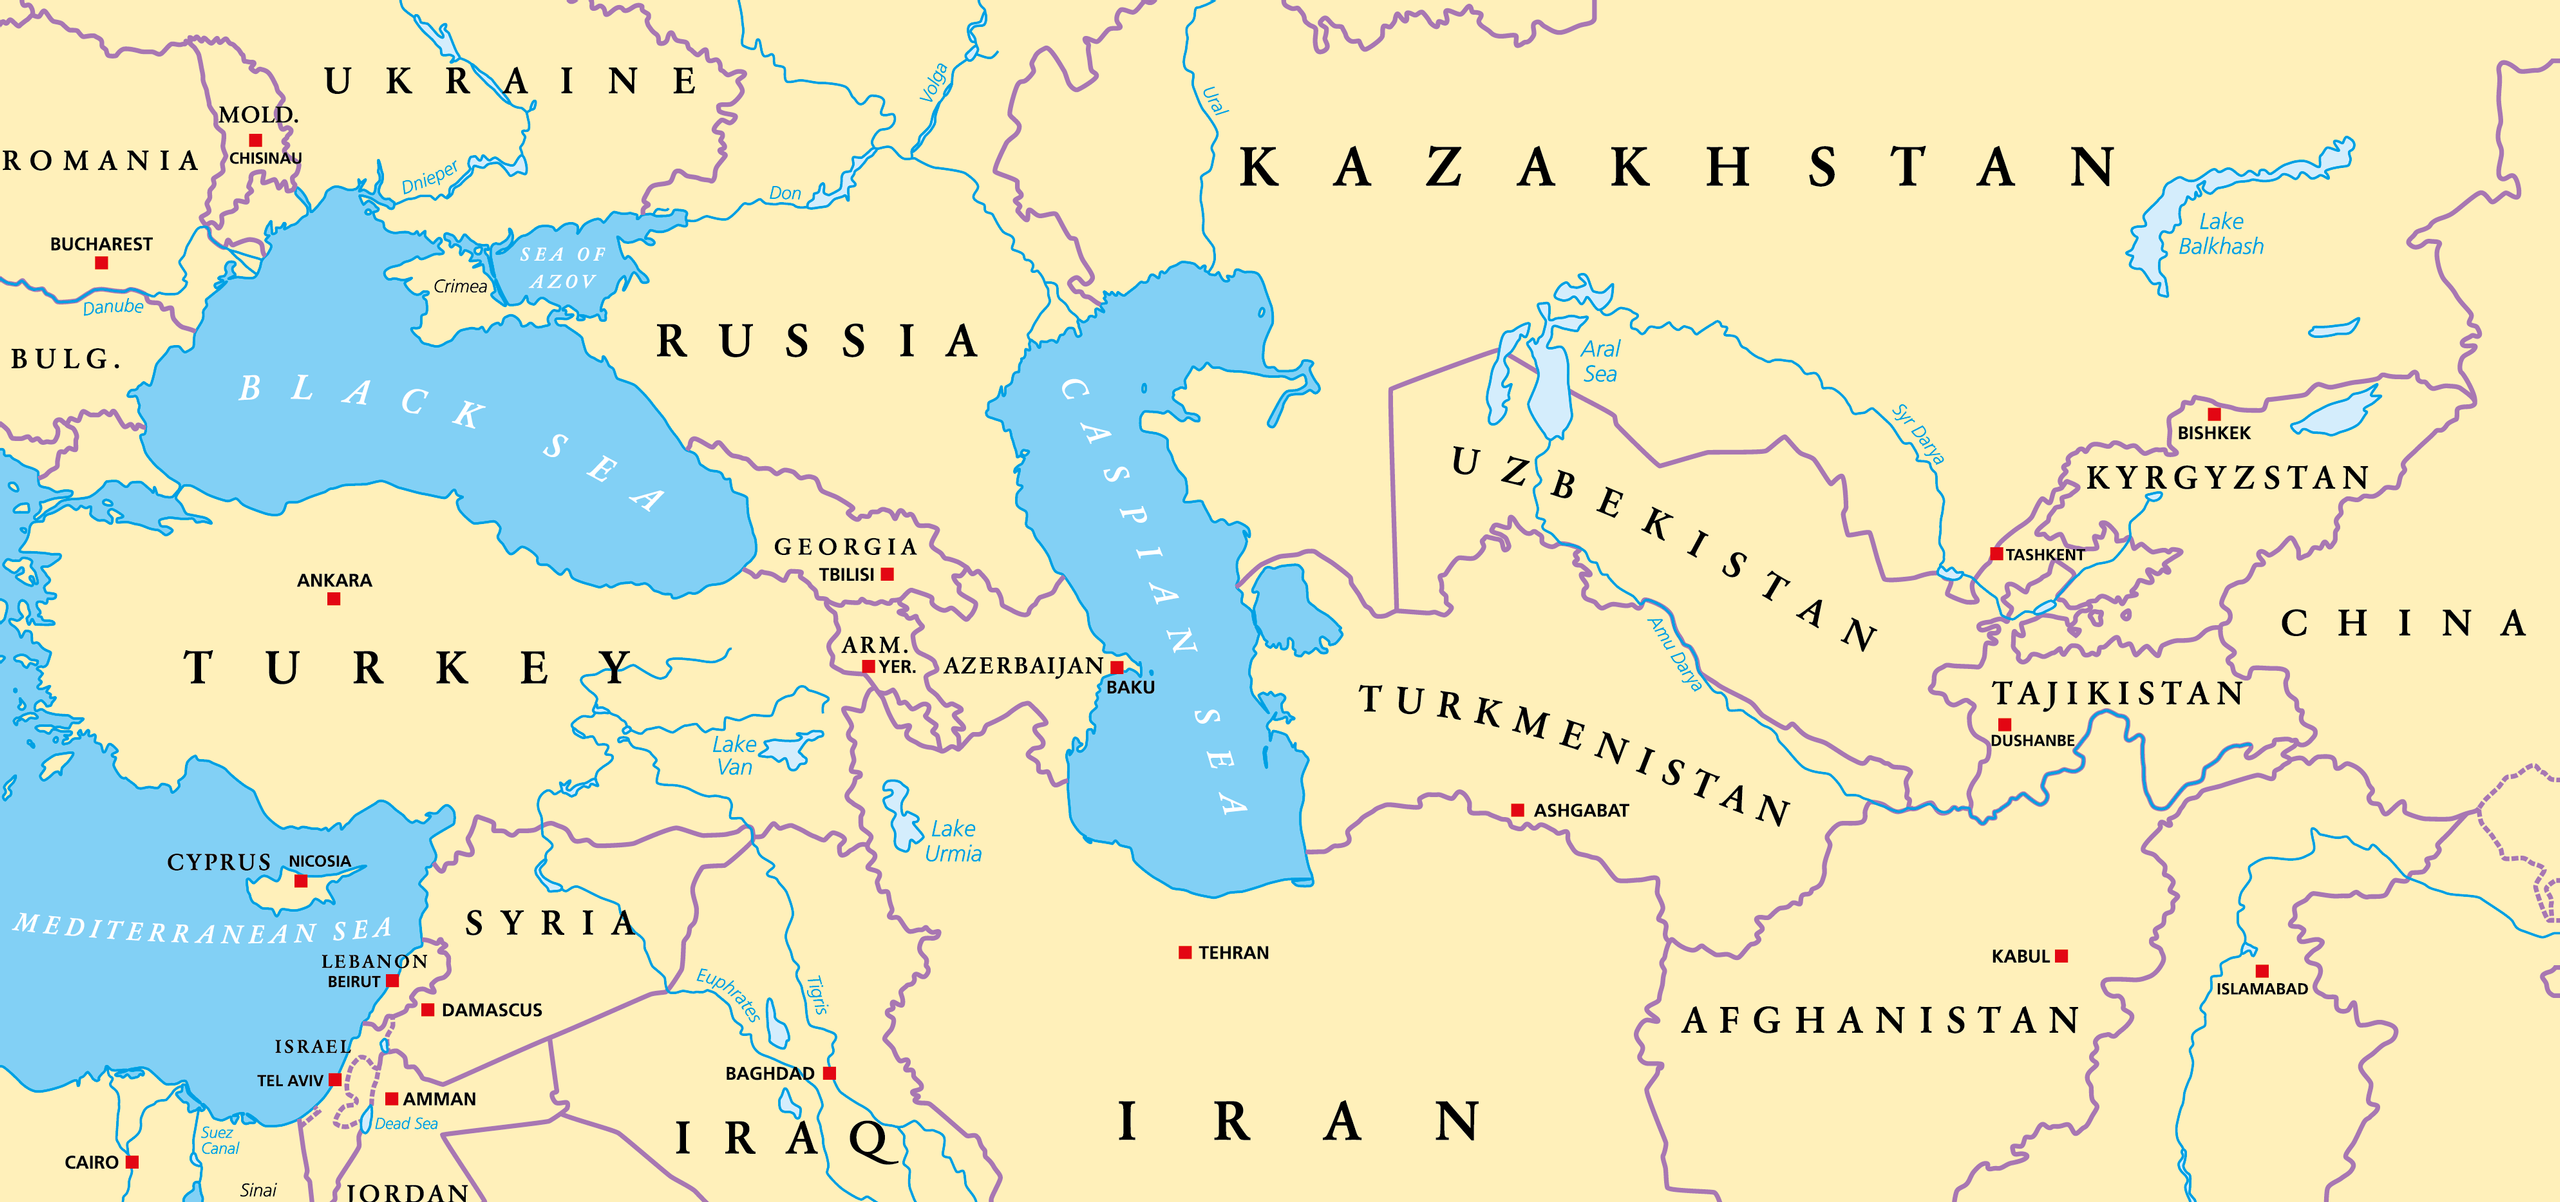 The caspian sea straddles the border between eastern europe and asia ...